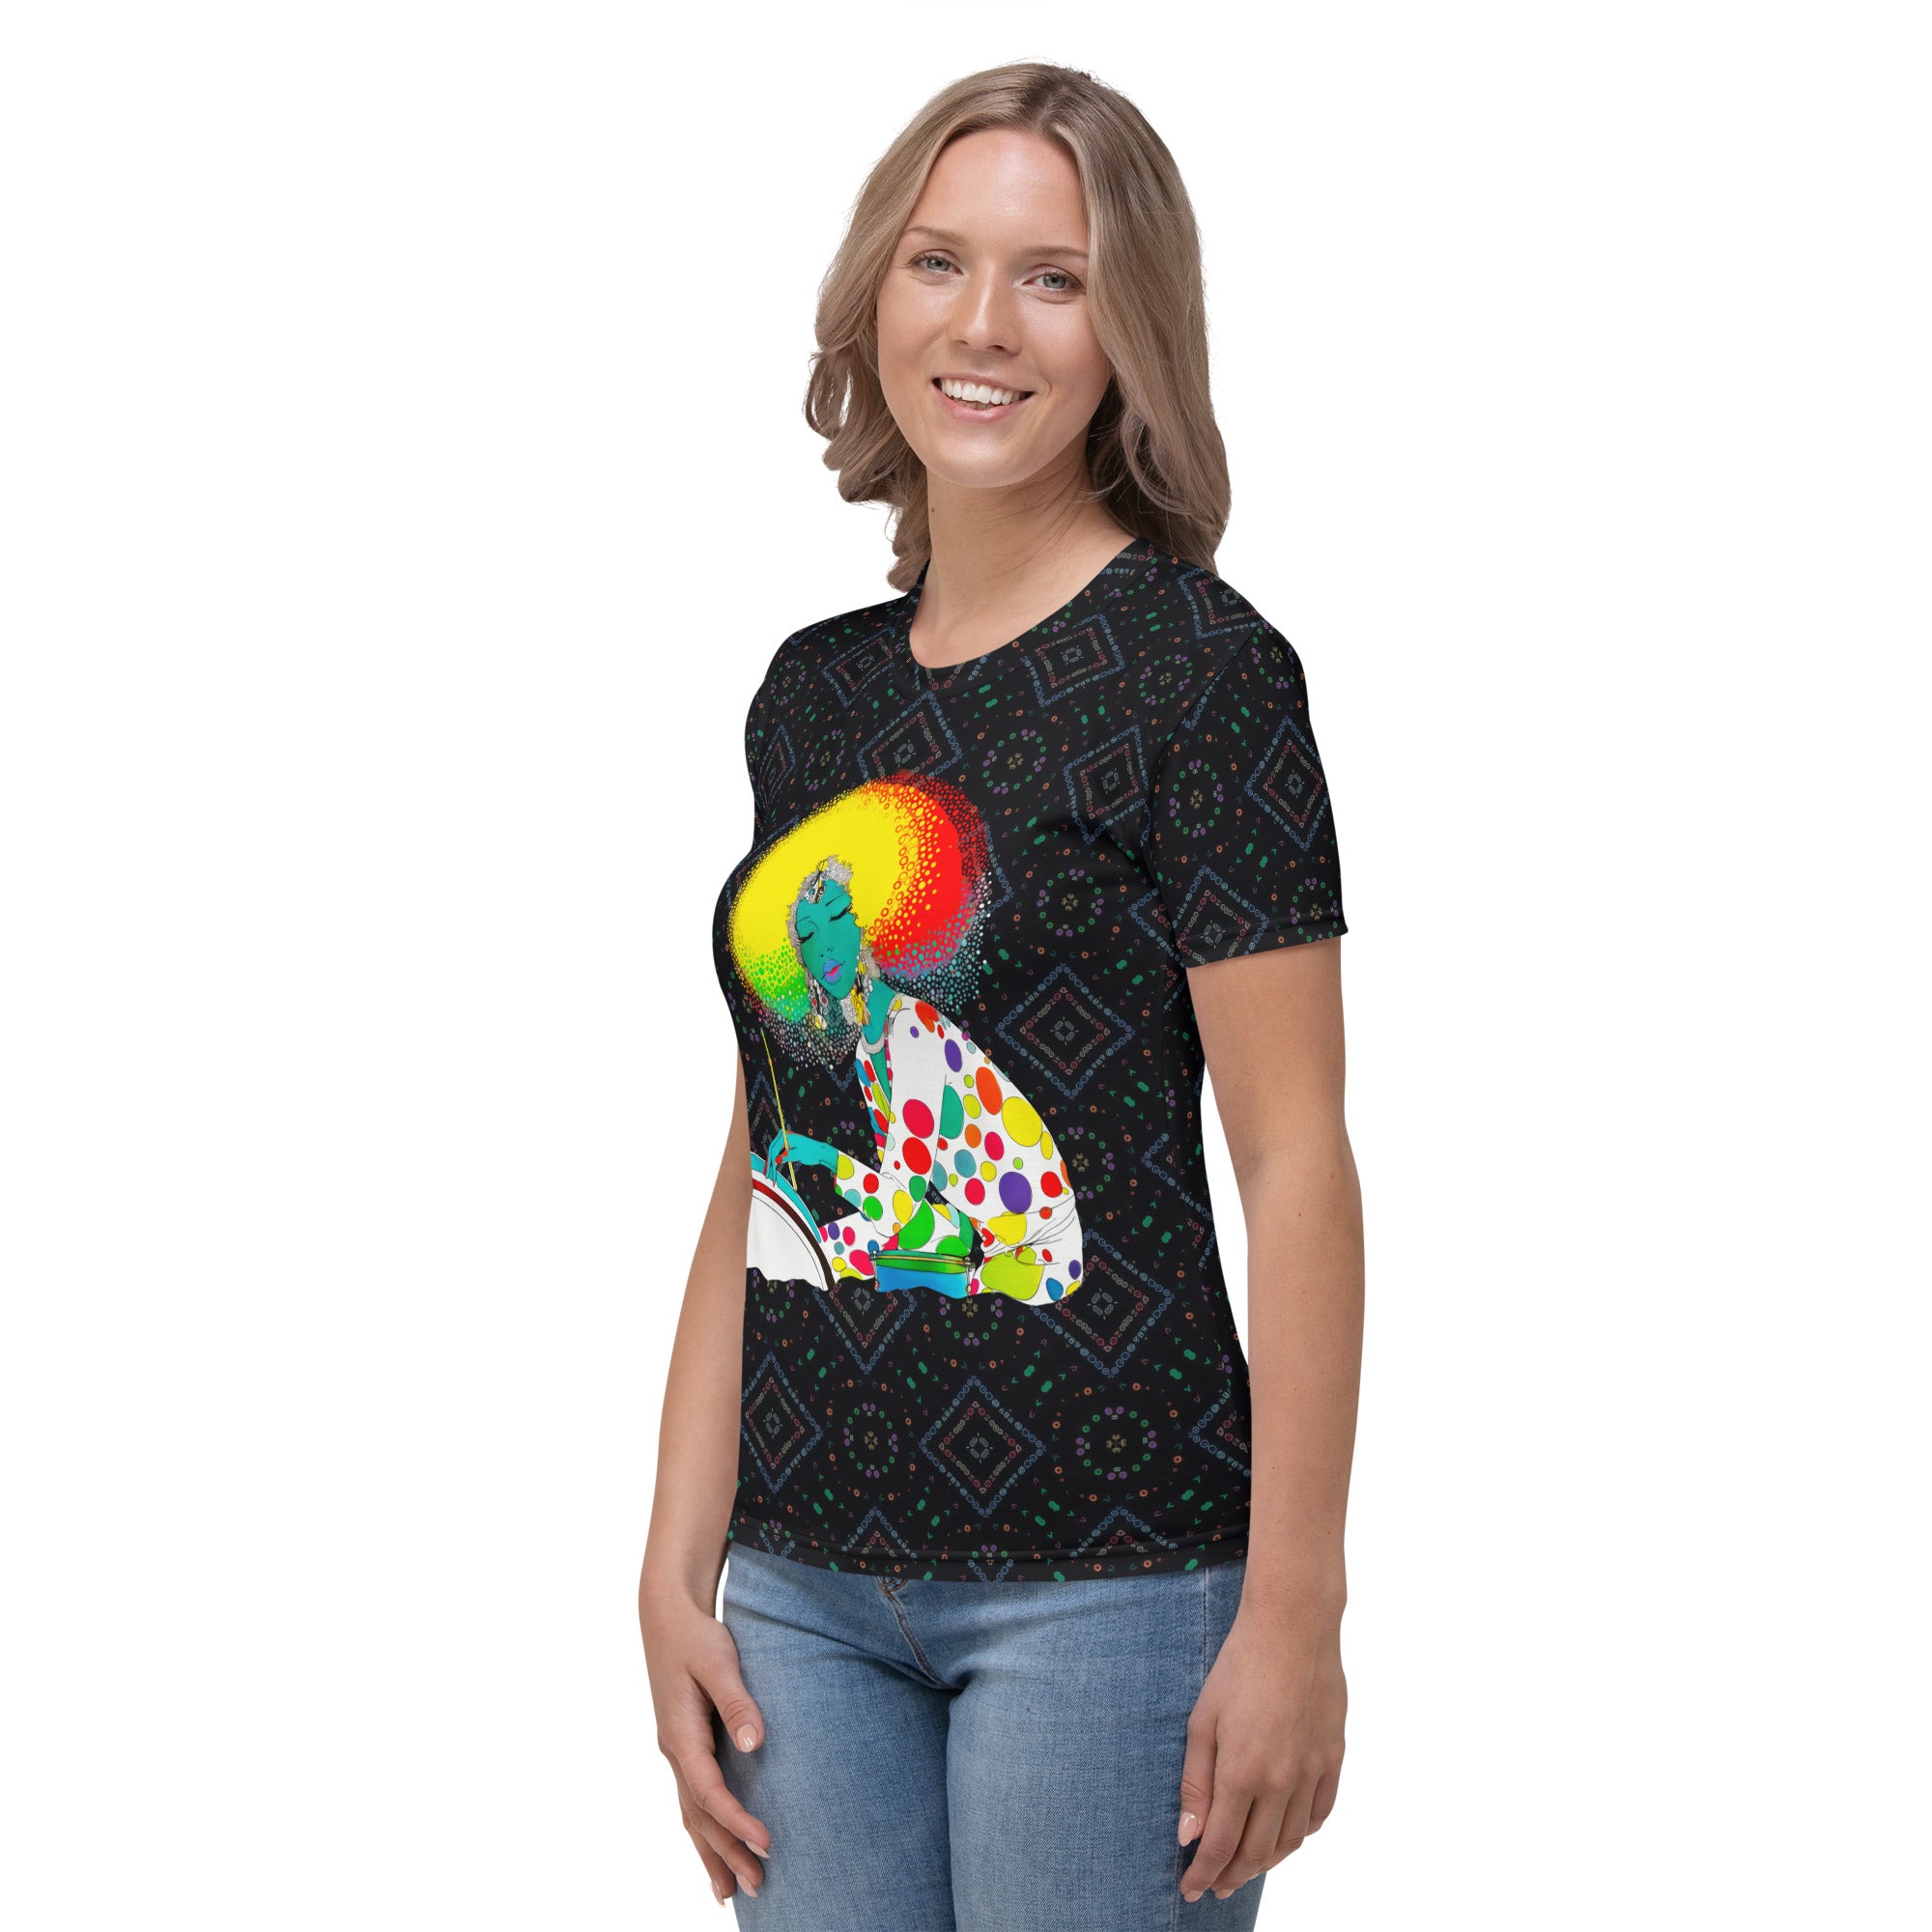 Mystic's Meadow Women's Crew Neck T-Shirt on a clothing mannequin.